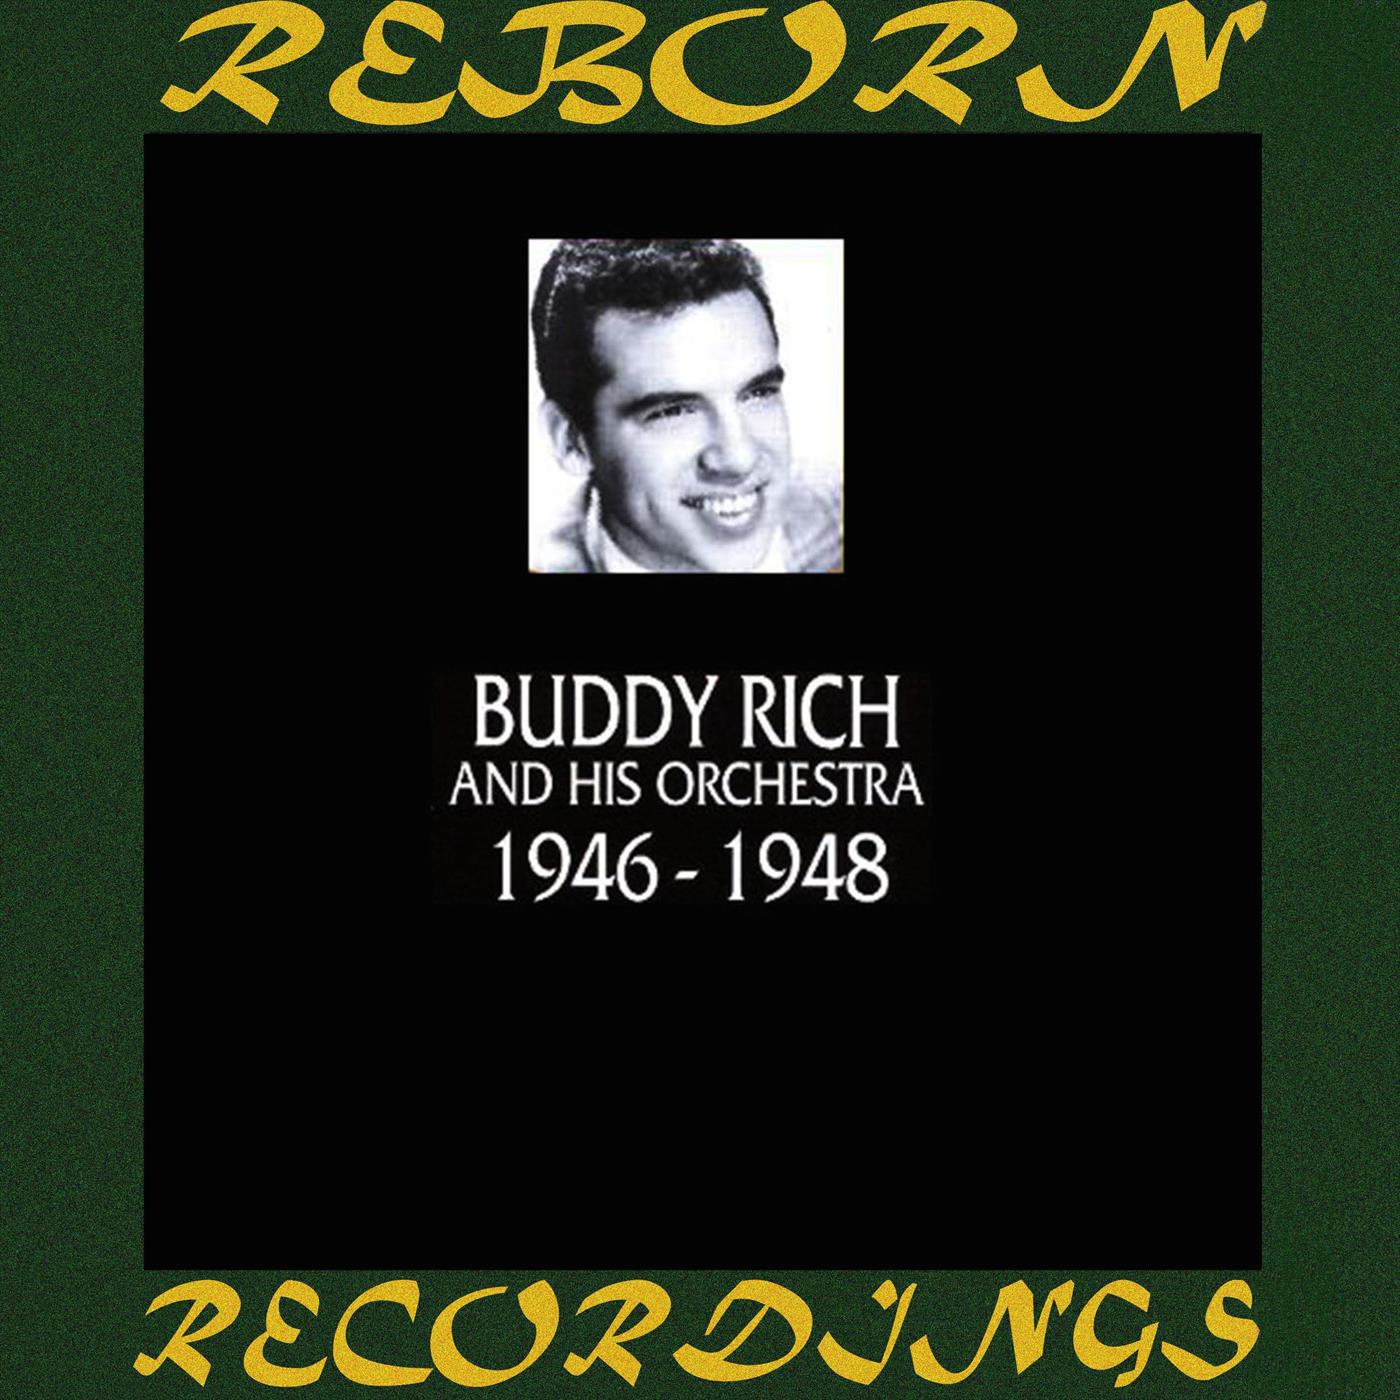 Buddy Rich In Chronology 1946-1948  (HD Remastered)